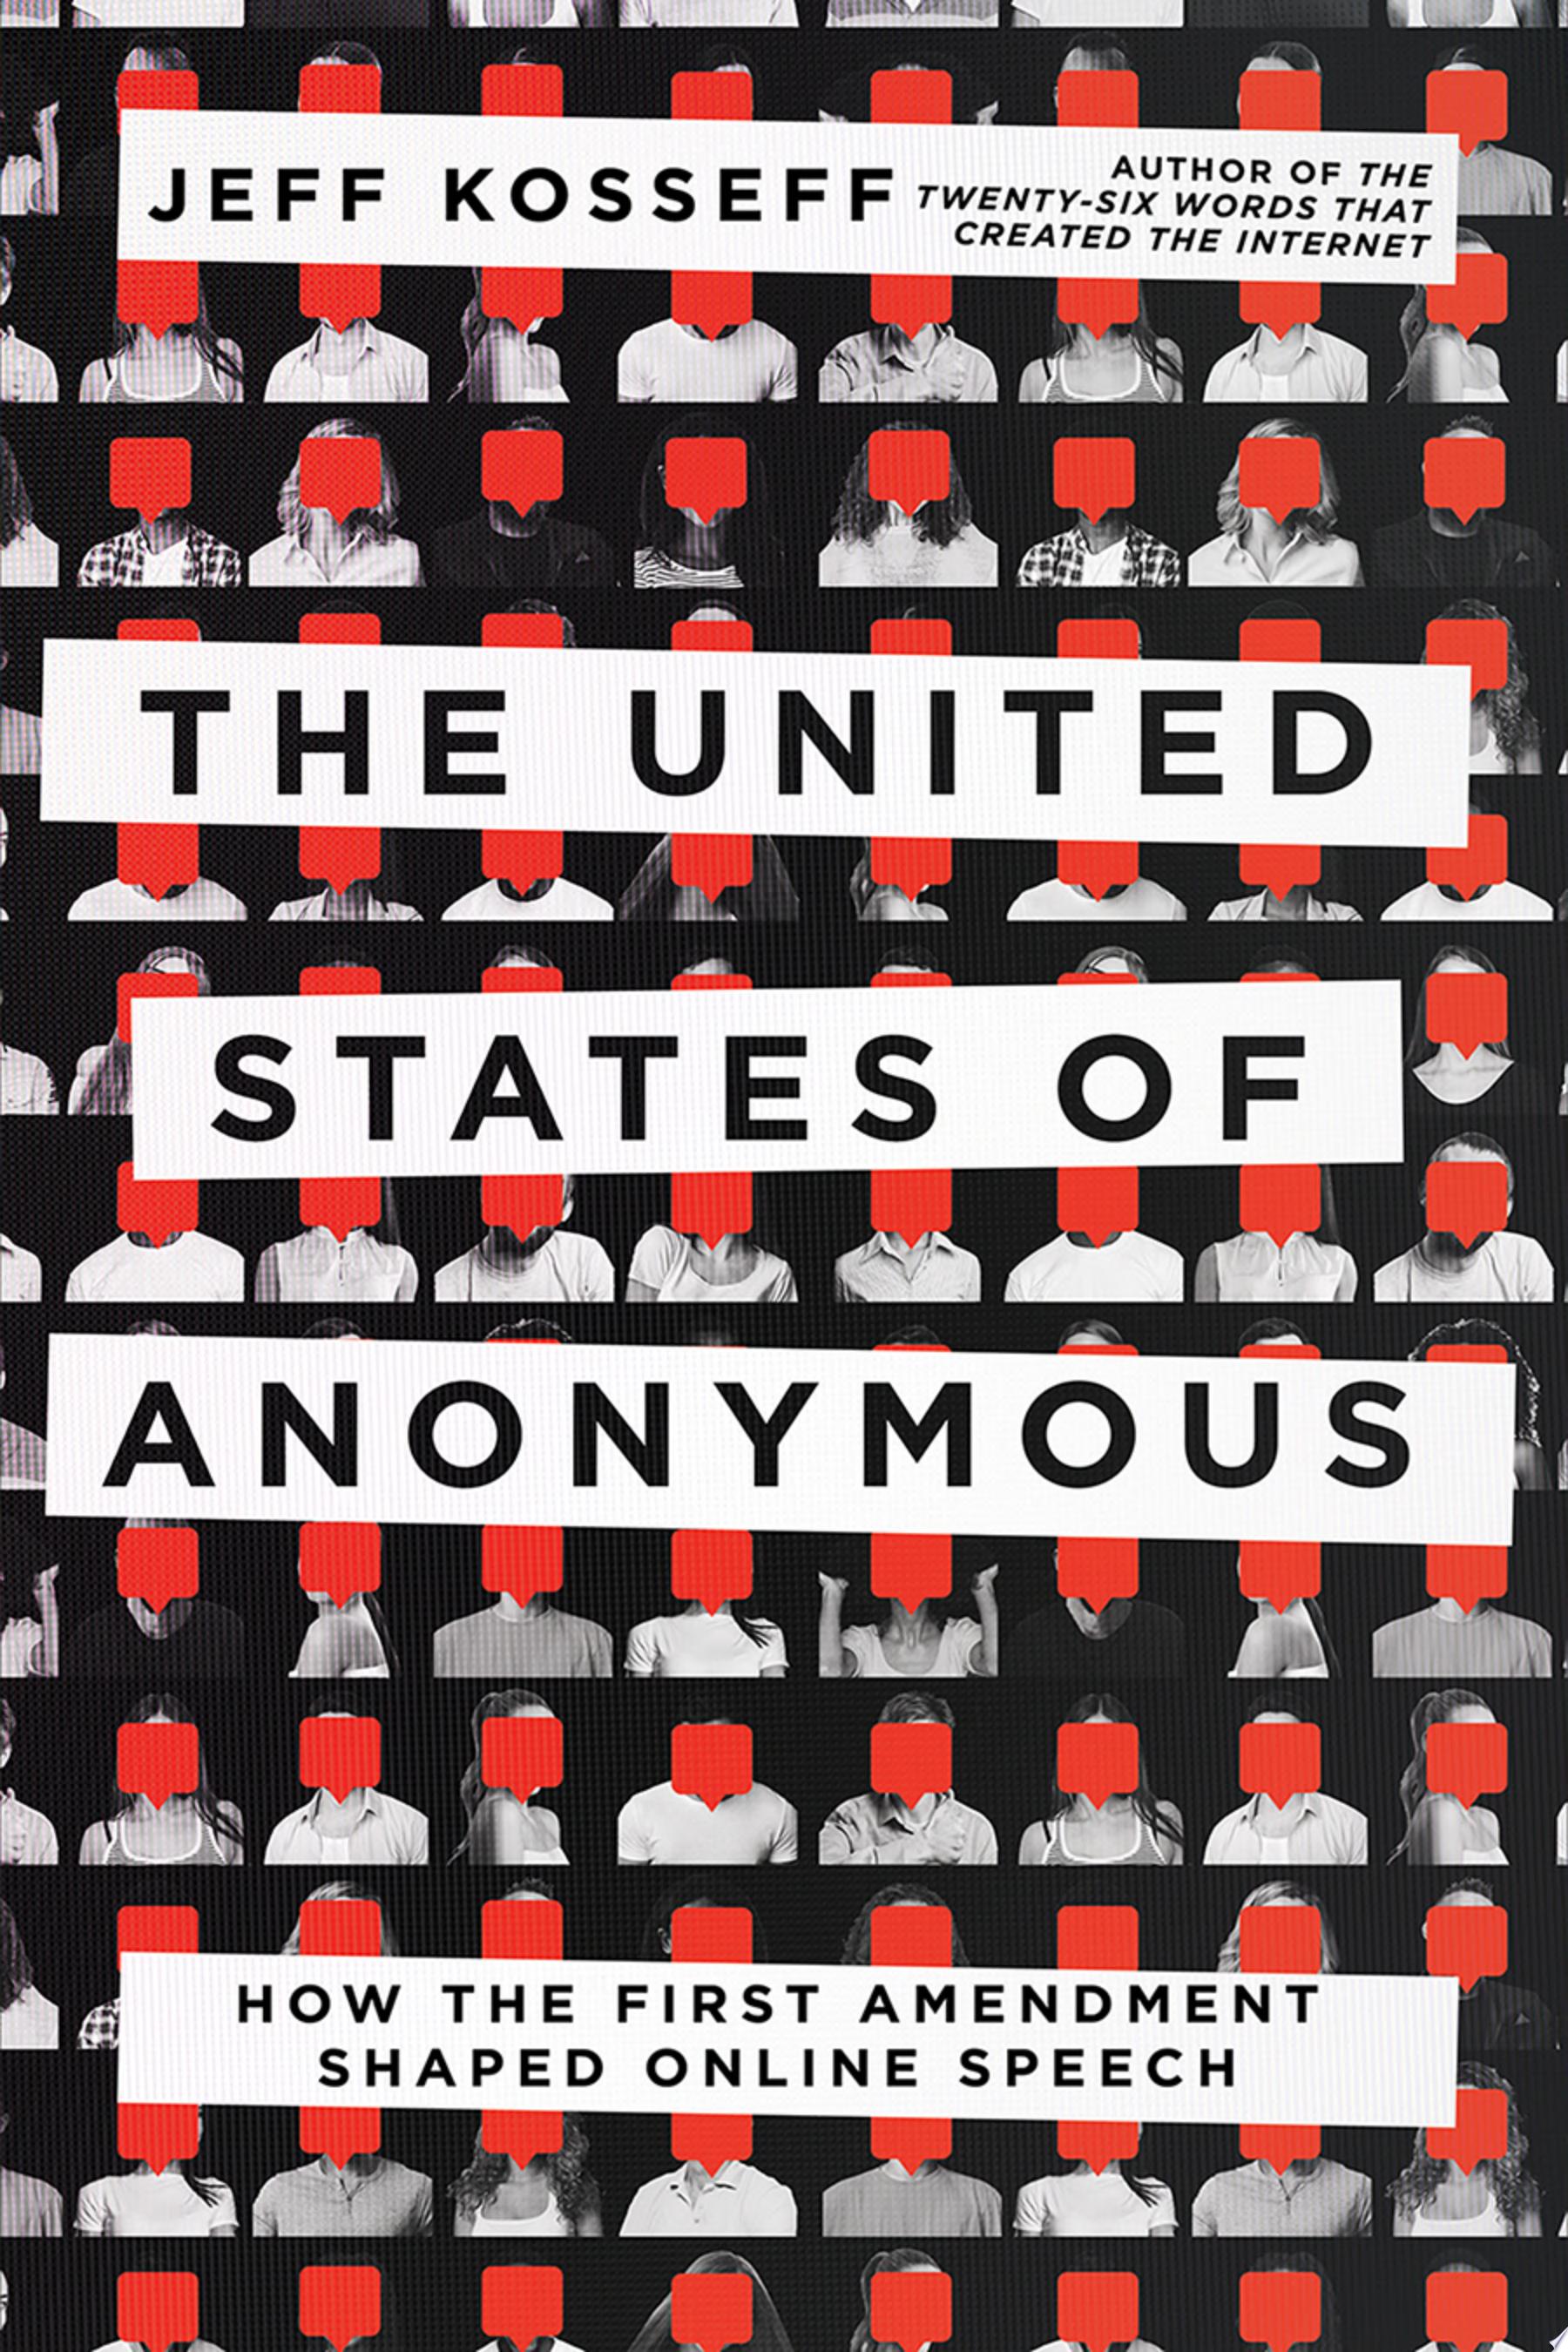 Image for "The United States of Anonymous"